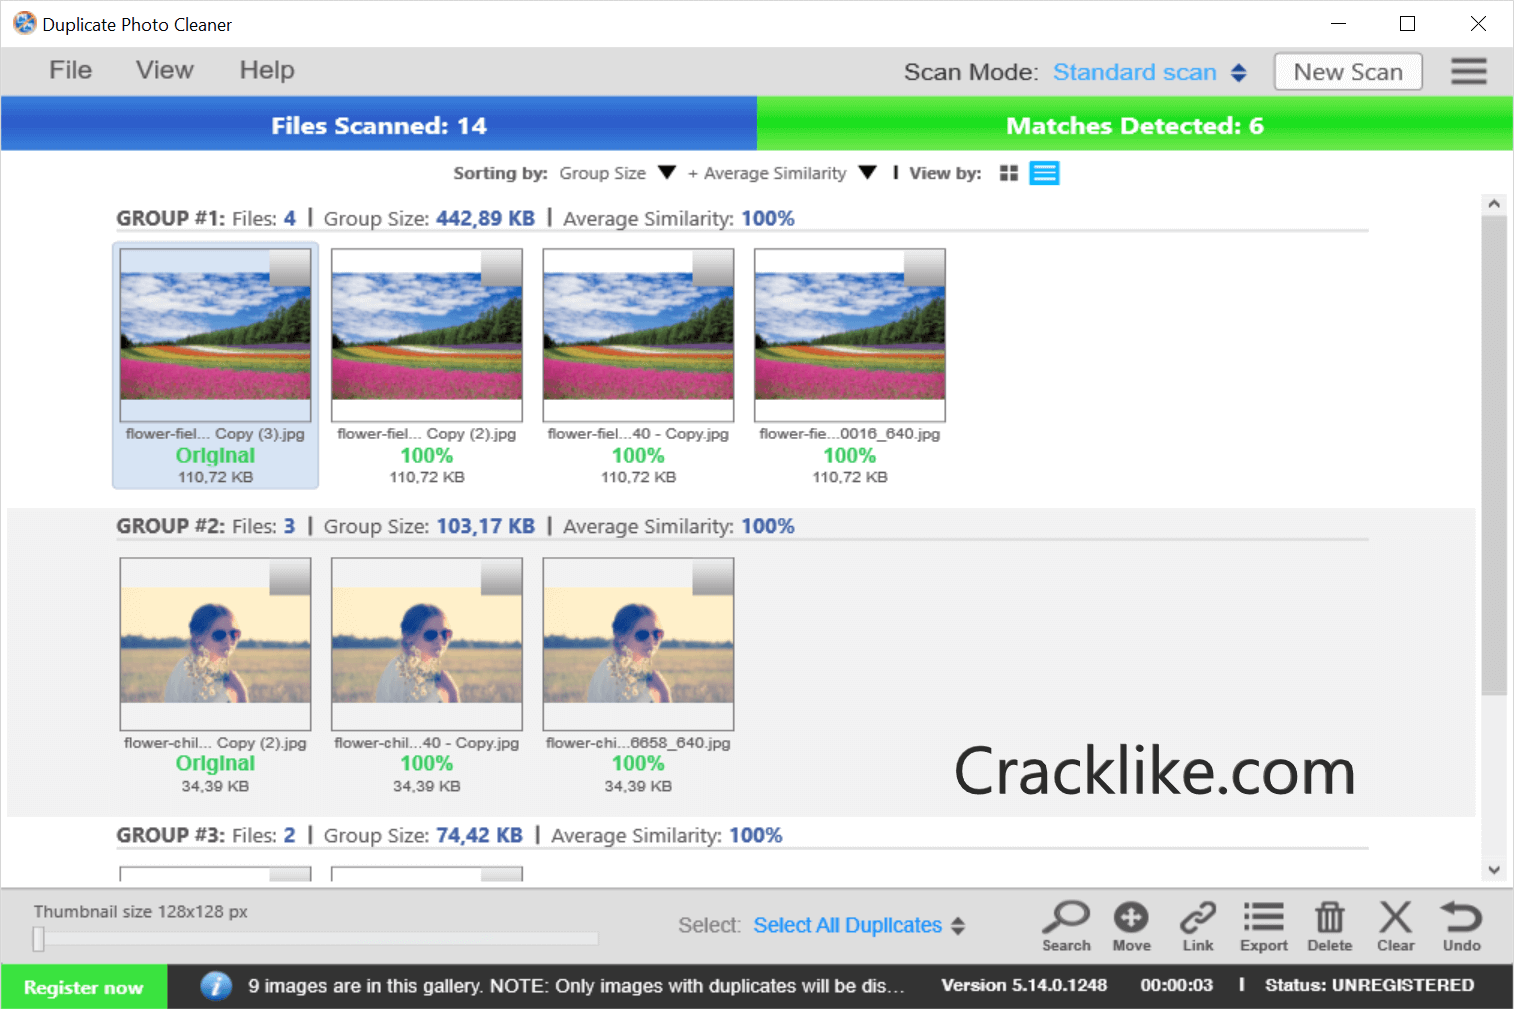 Duplicate Photo Cleaner 7.10.0.20 Crack With License Key Latest Version Free Download 2022